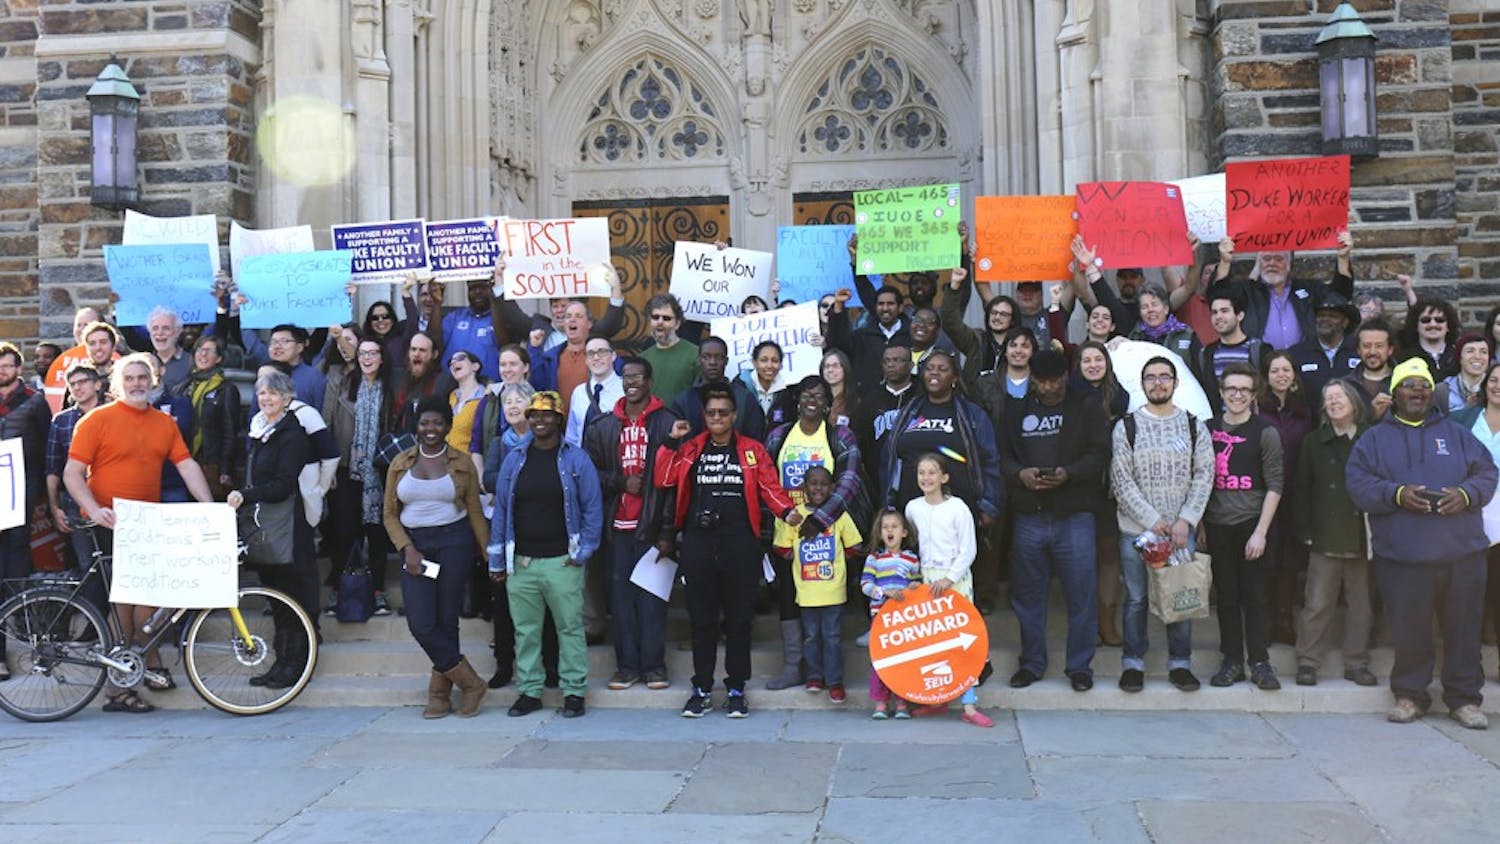 People gather at Duke Chapel to celebrate Duke Teaching First becoming eligible to unionize.